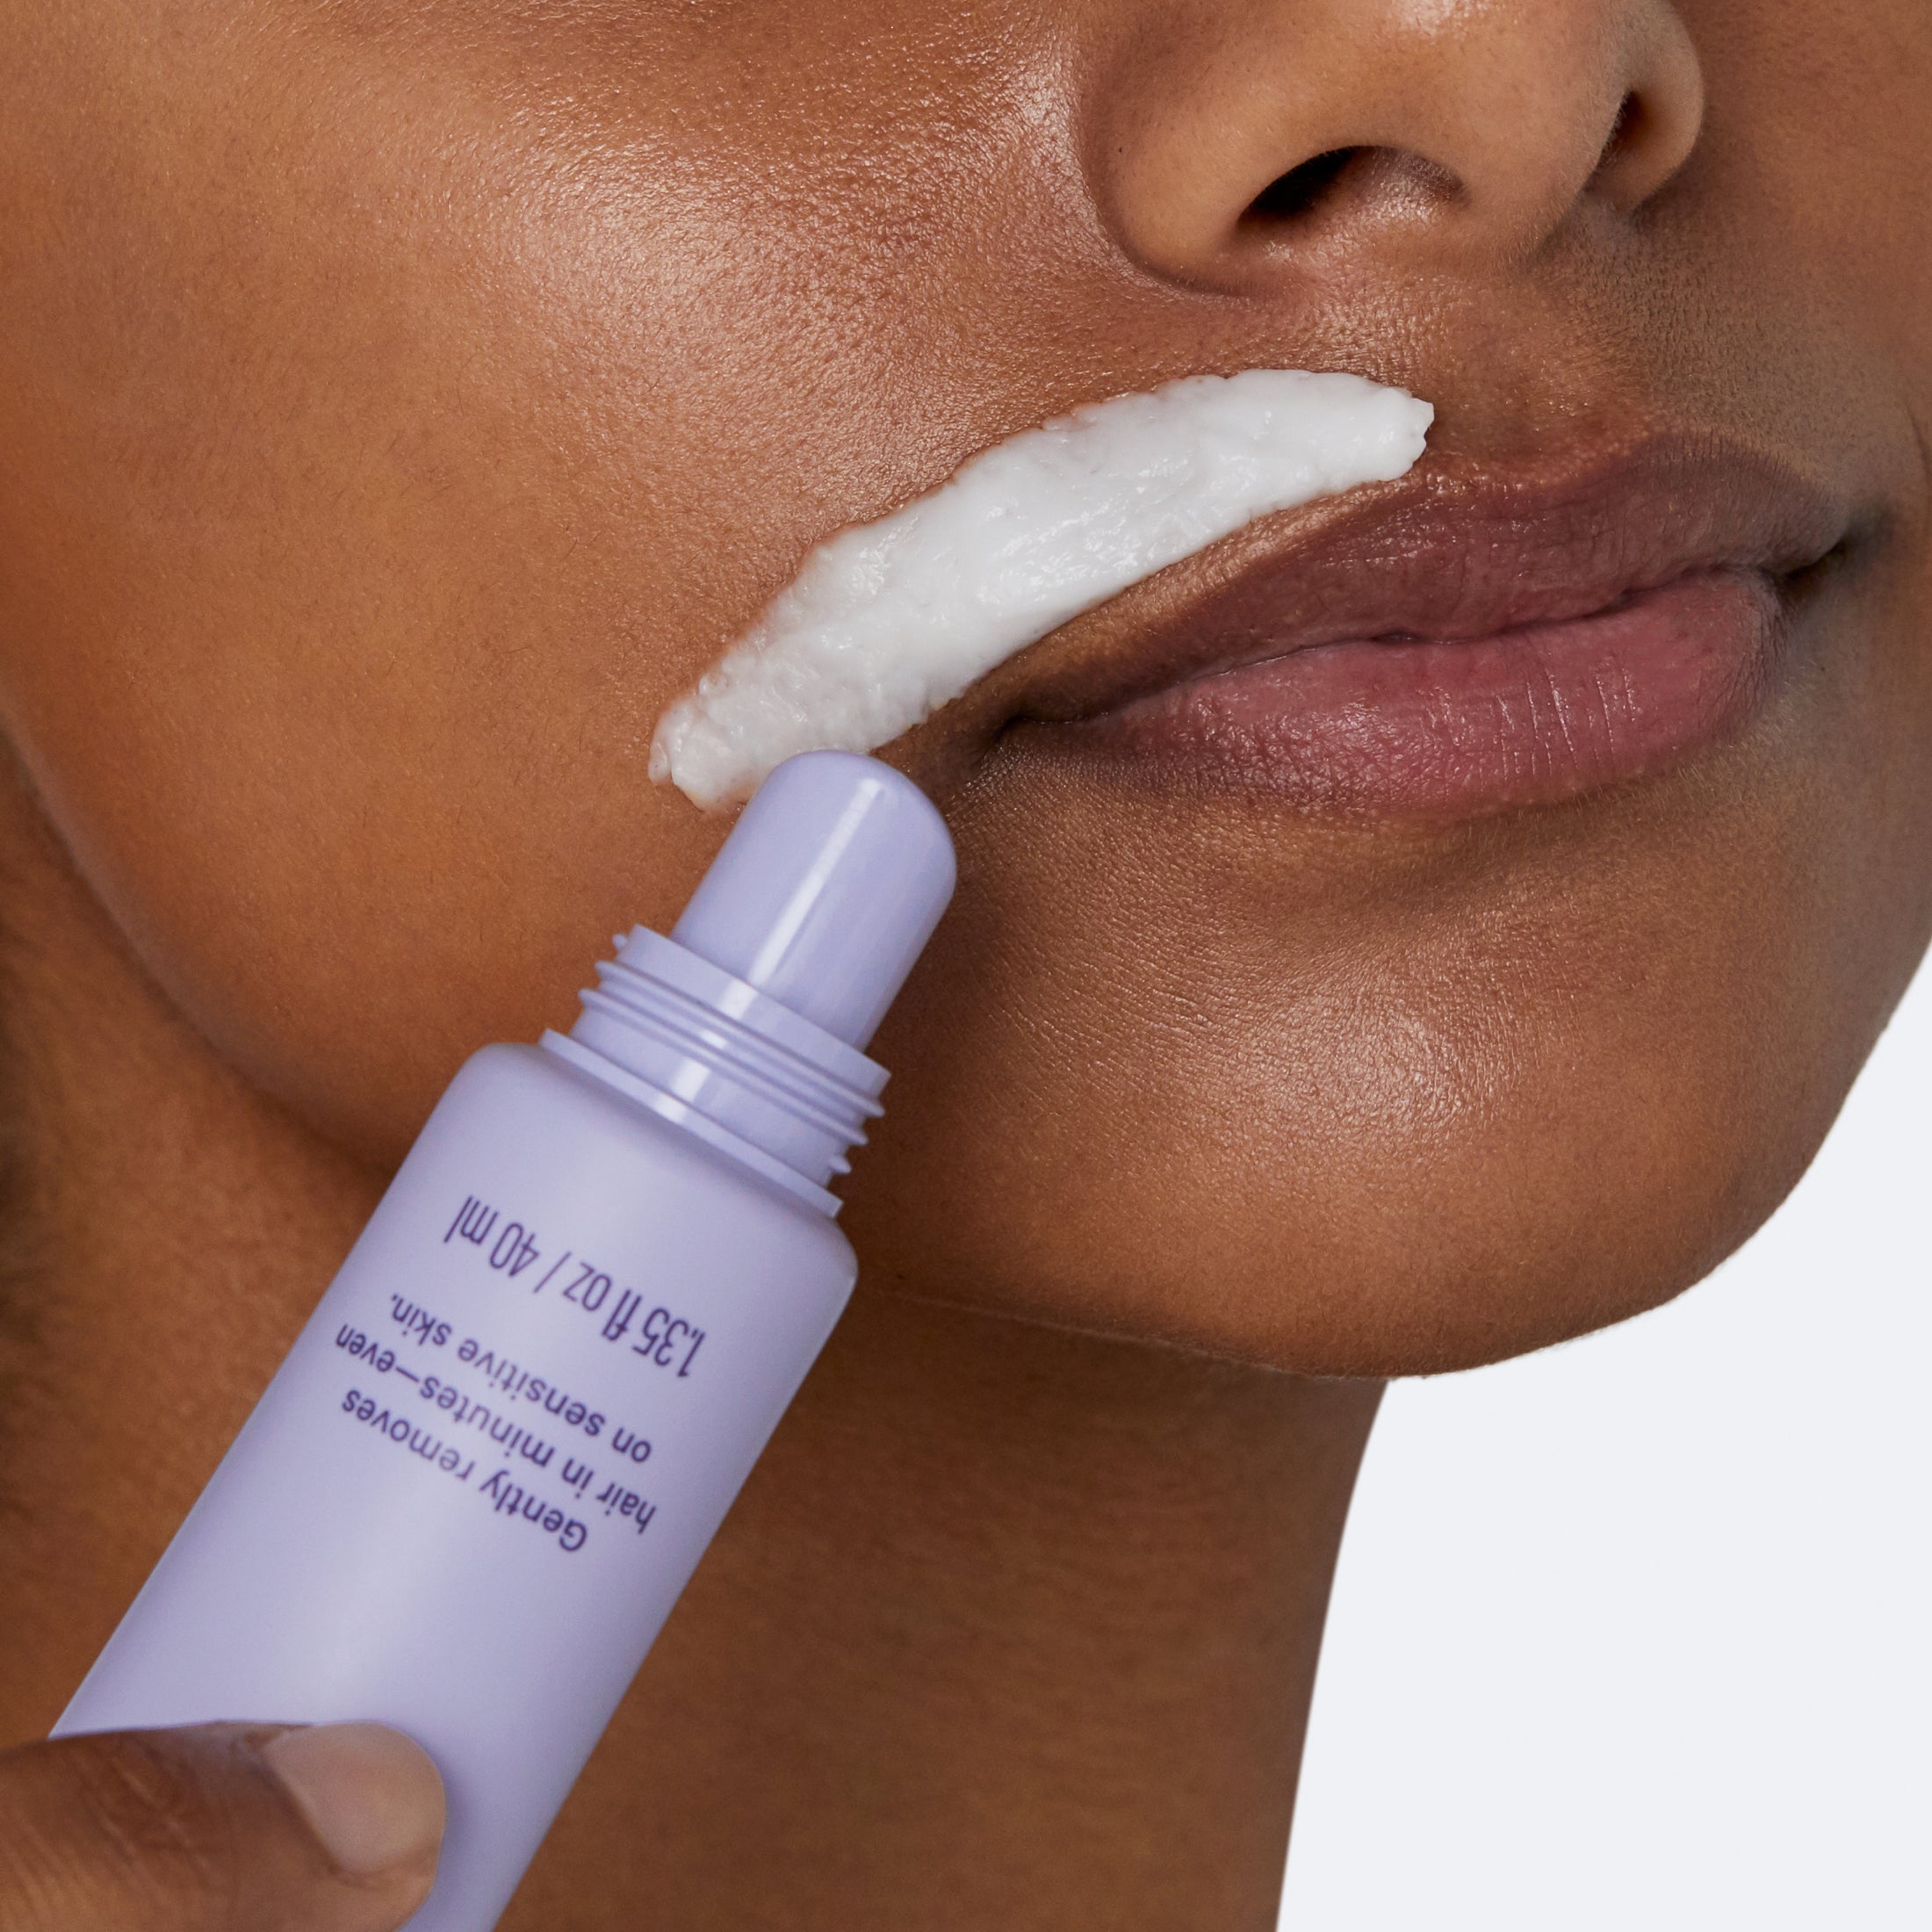 Anything but lip service 👄 Our Facial Hair Removal Cream is